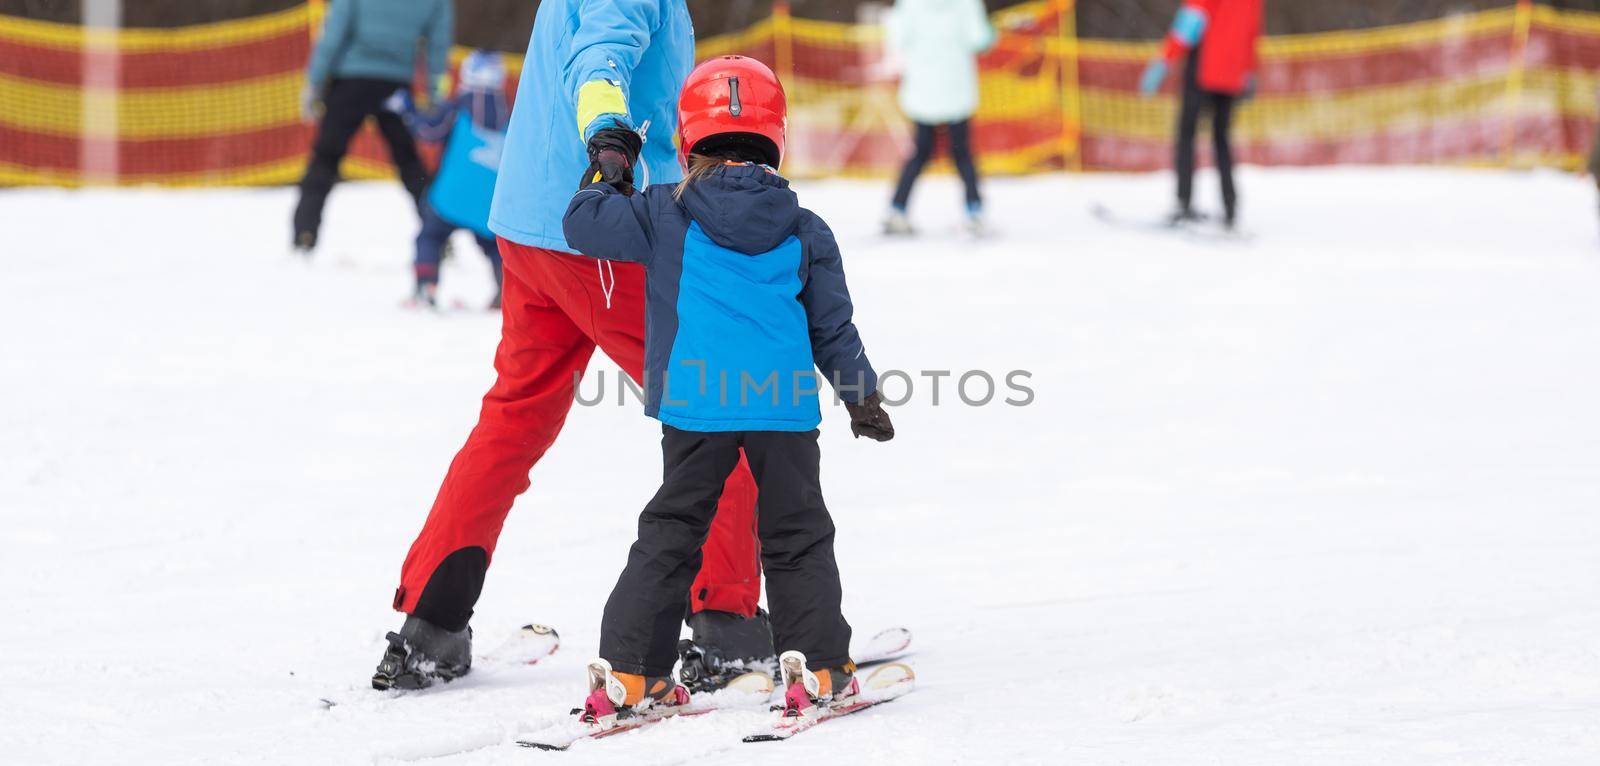 skiing master class for kids with instructor in winter sports school for children